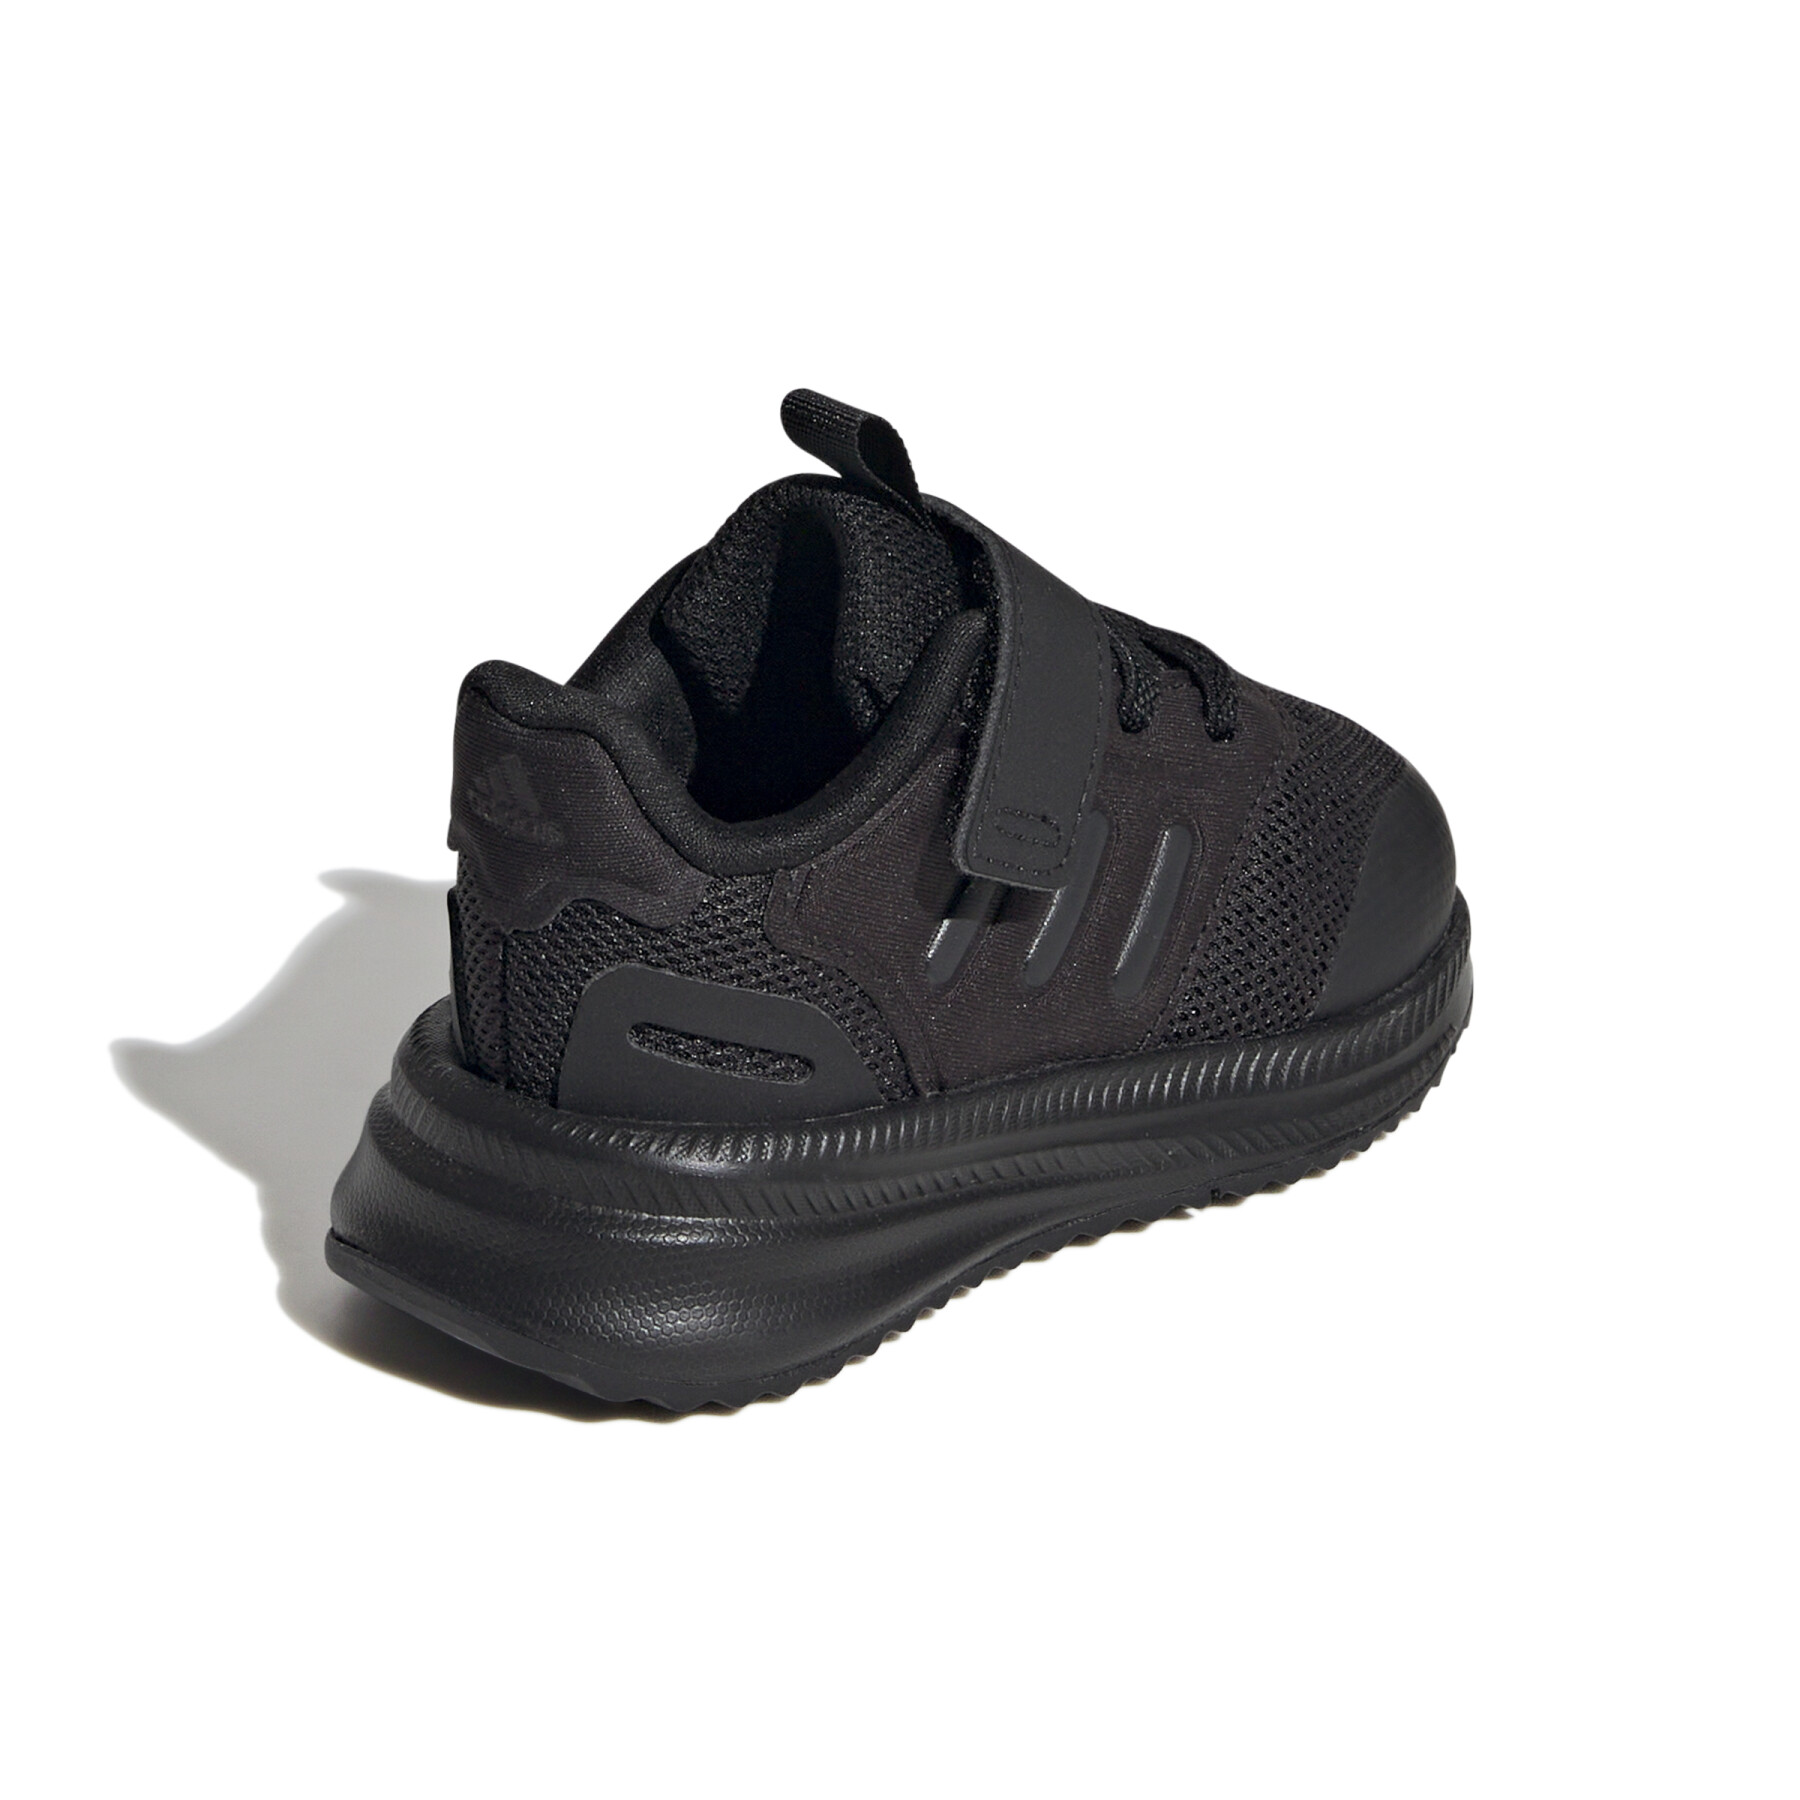 Baby sneakers adidas X_Plrphase